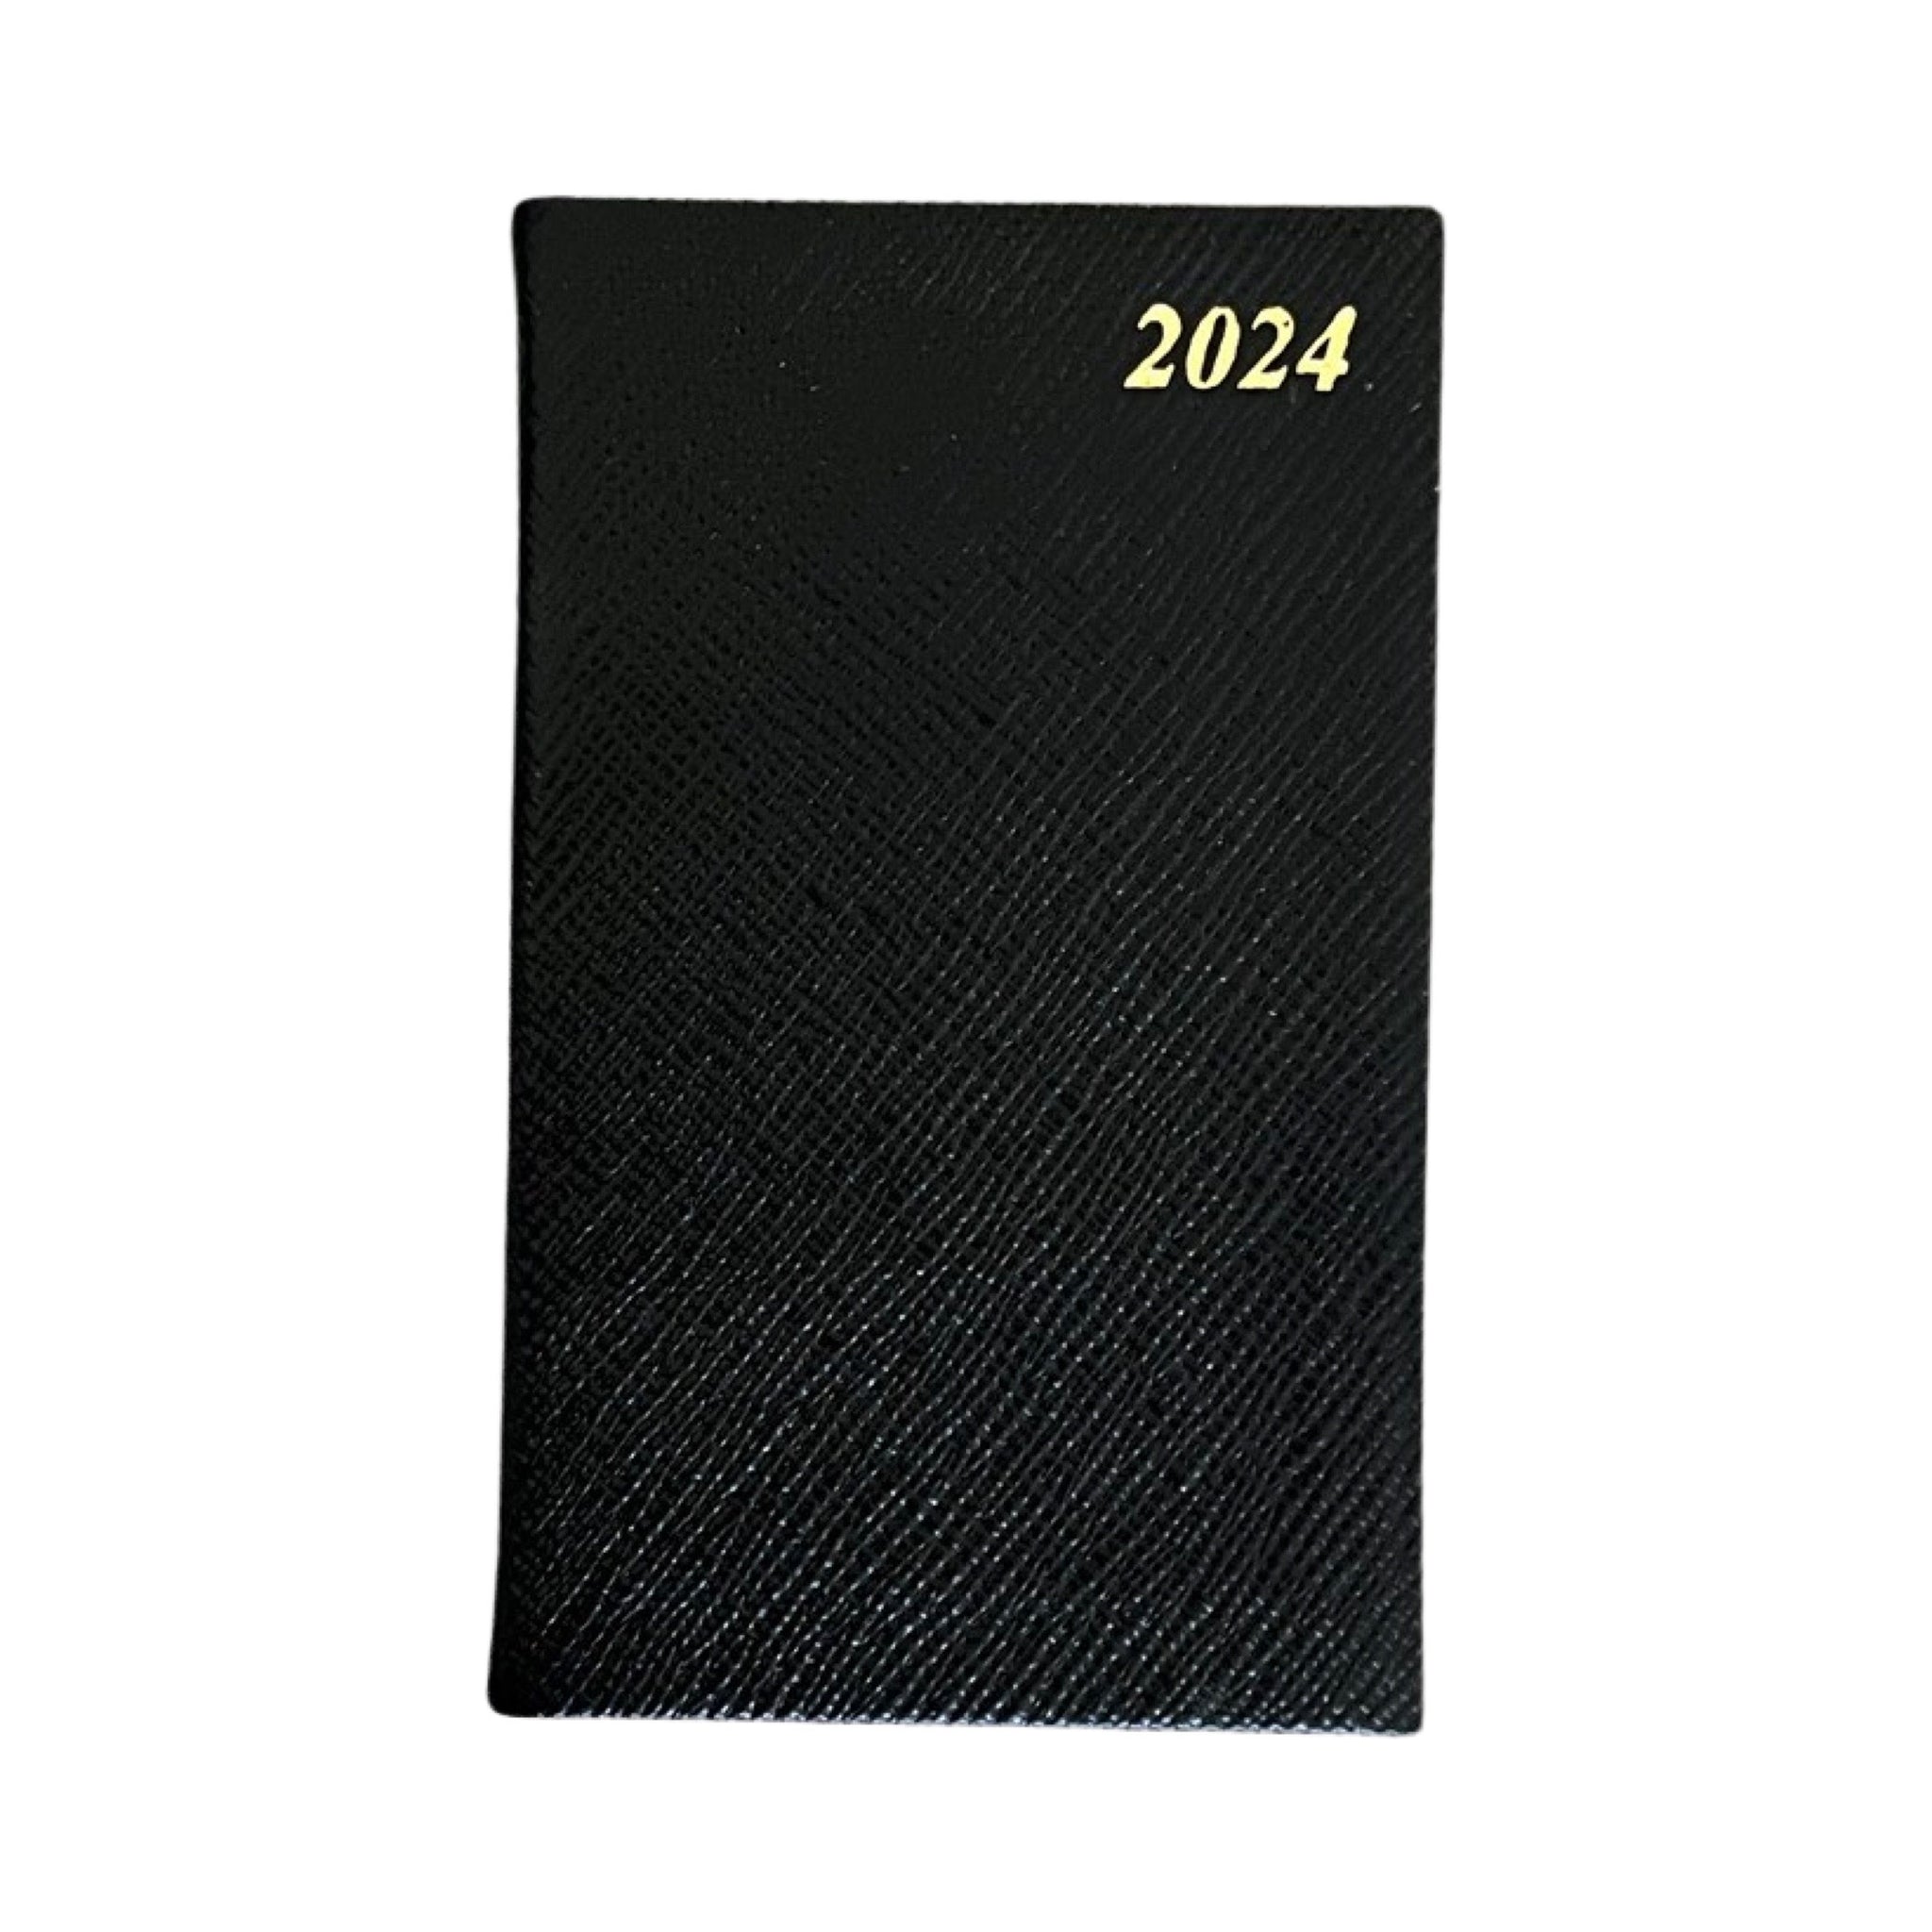 Charing Cross D753L 2024 Leather Pocket Diary Book, Calendar Planner